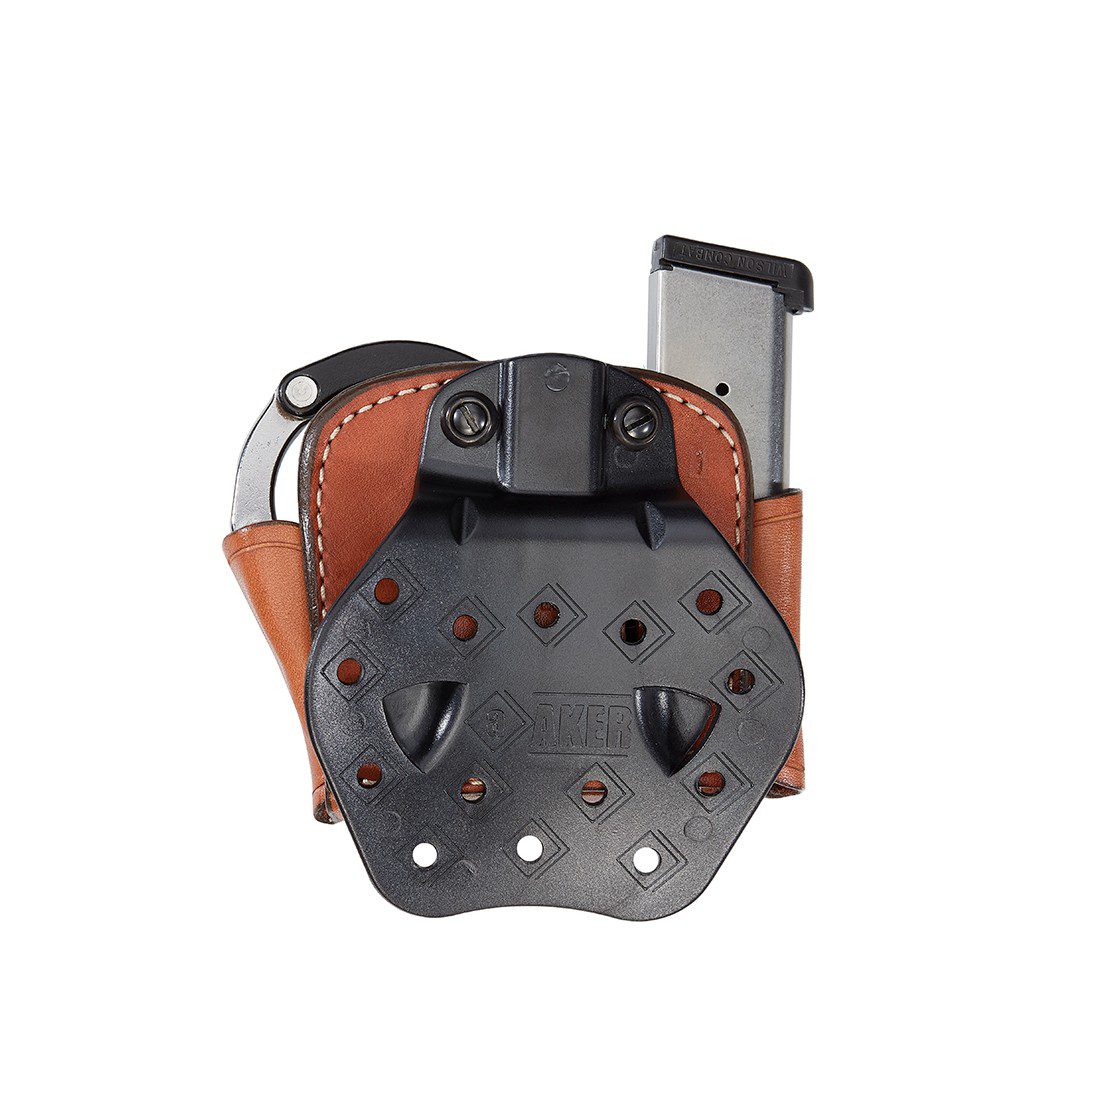 Aker Leather D.M.S.™ ASP Cuff/Mag Combo™ Combination Paddle Pouch - Tactical & Duty Gear